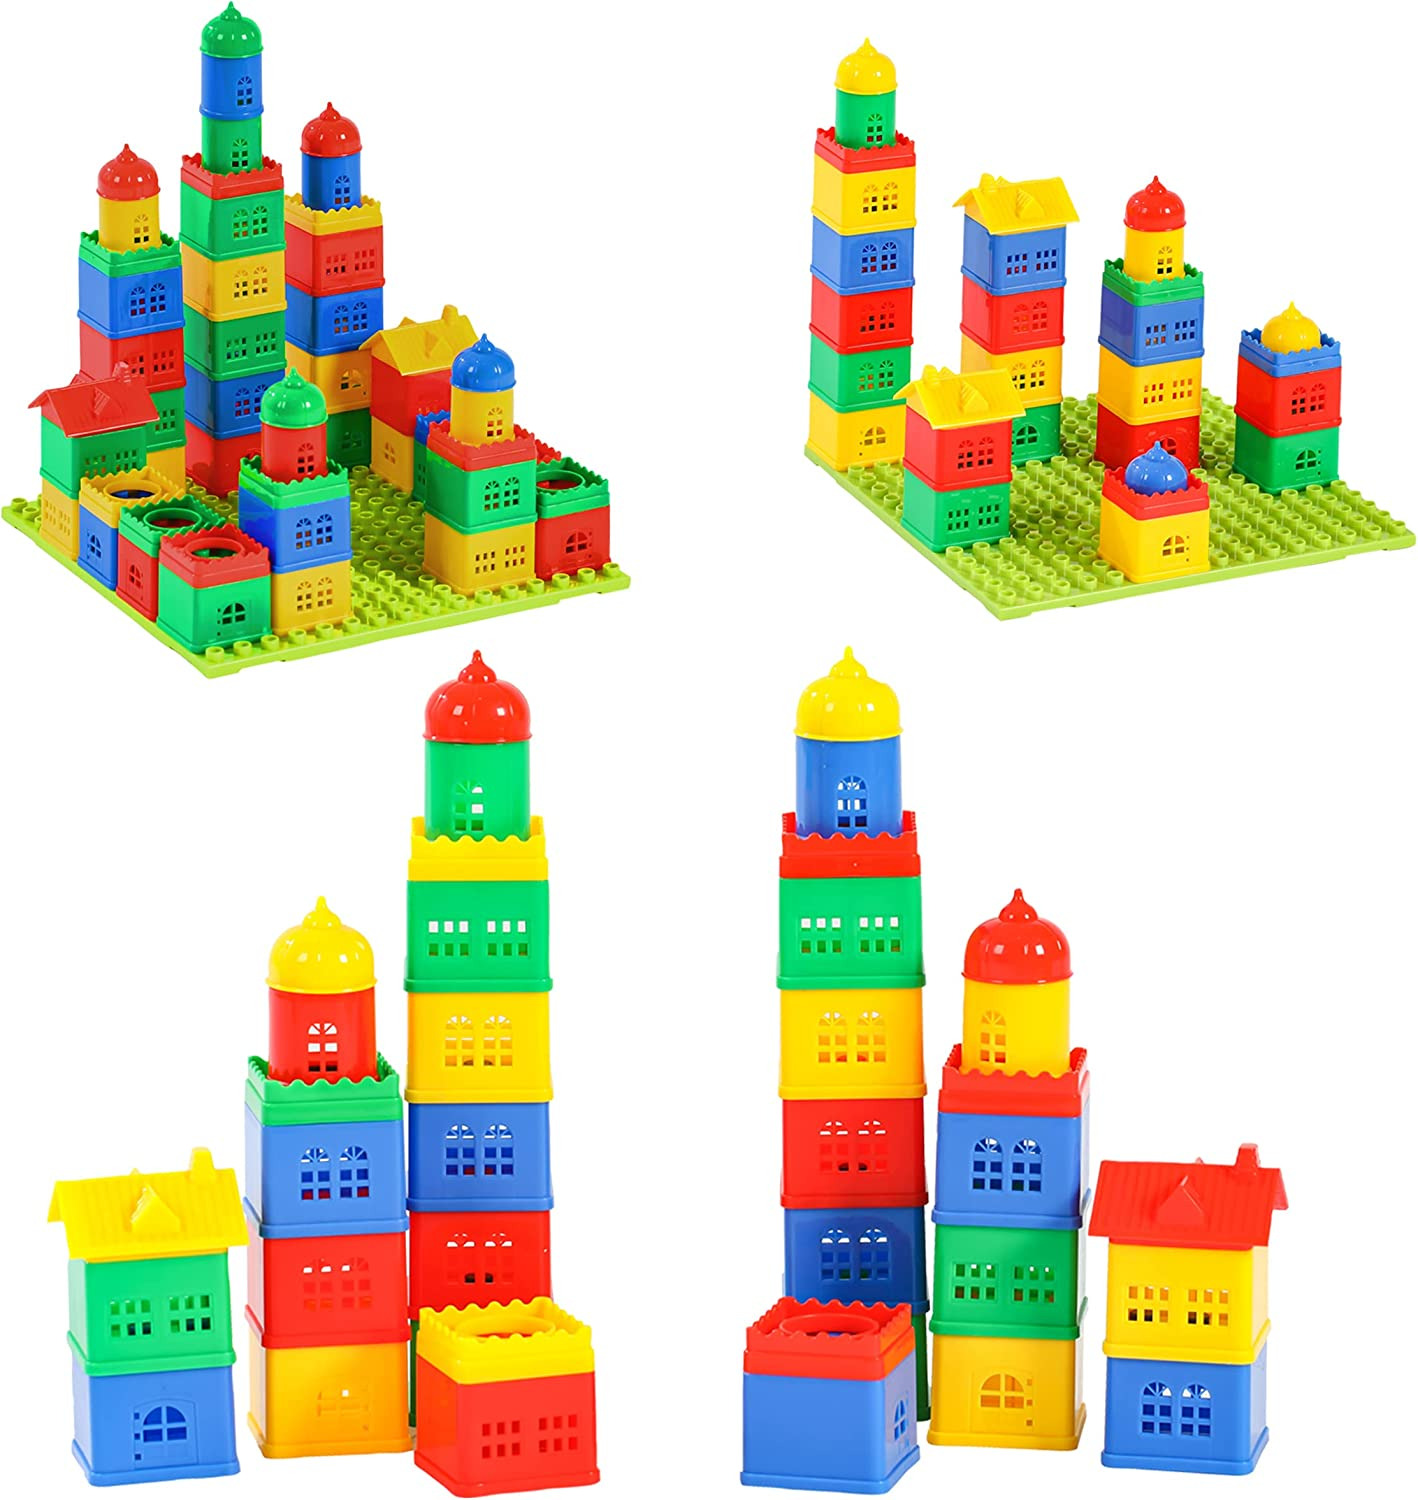 Fun Stackable Blocks for Toddler Play